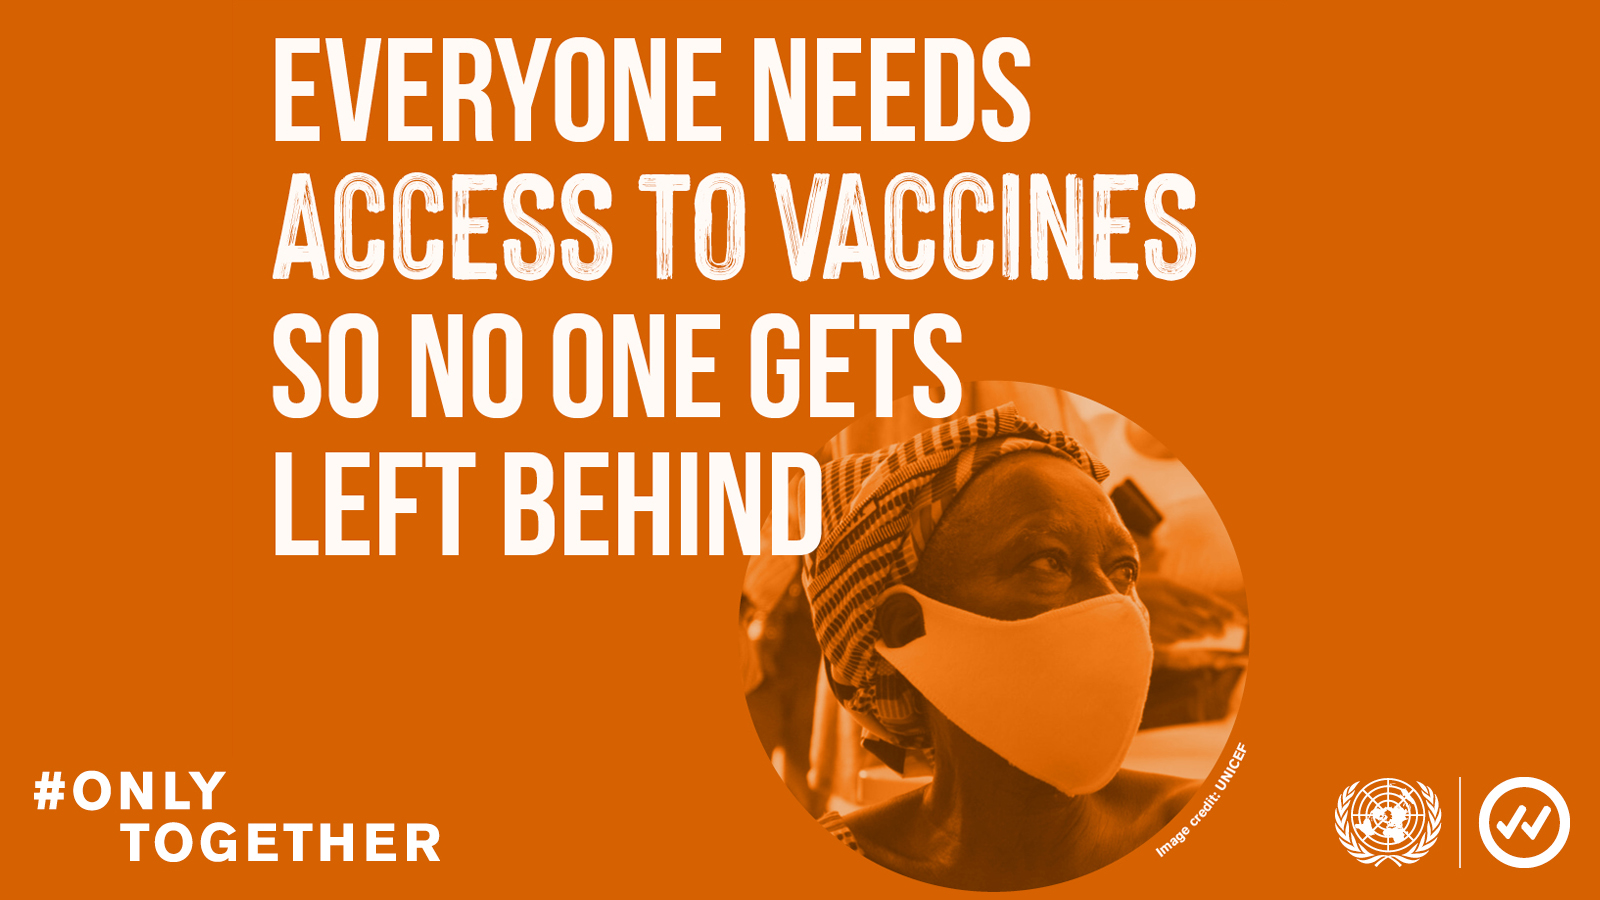 Promotion for the Verified campaign that reads: Everyone needs access to vaccines so no one gets left behind